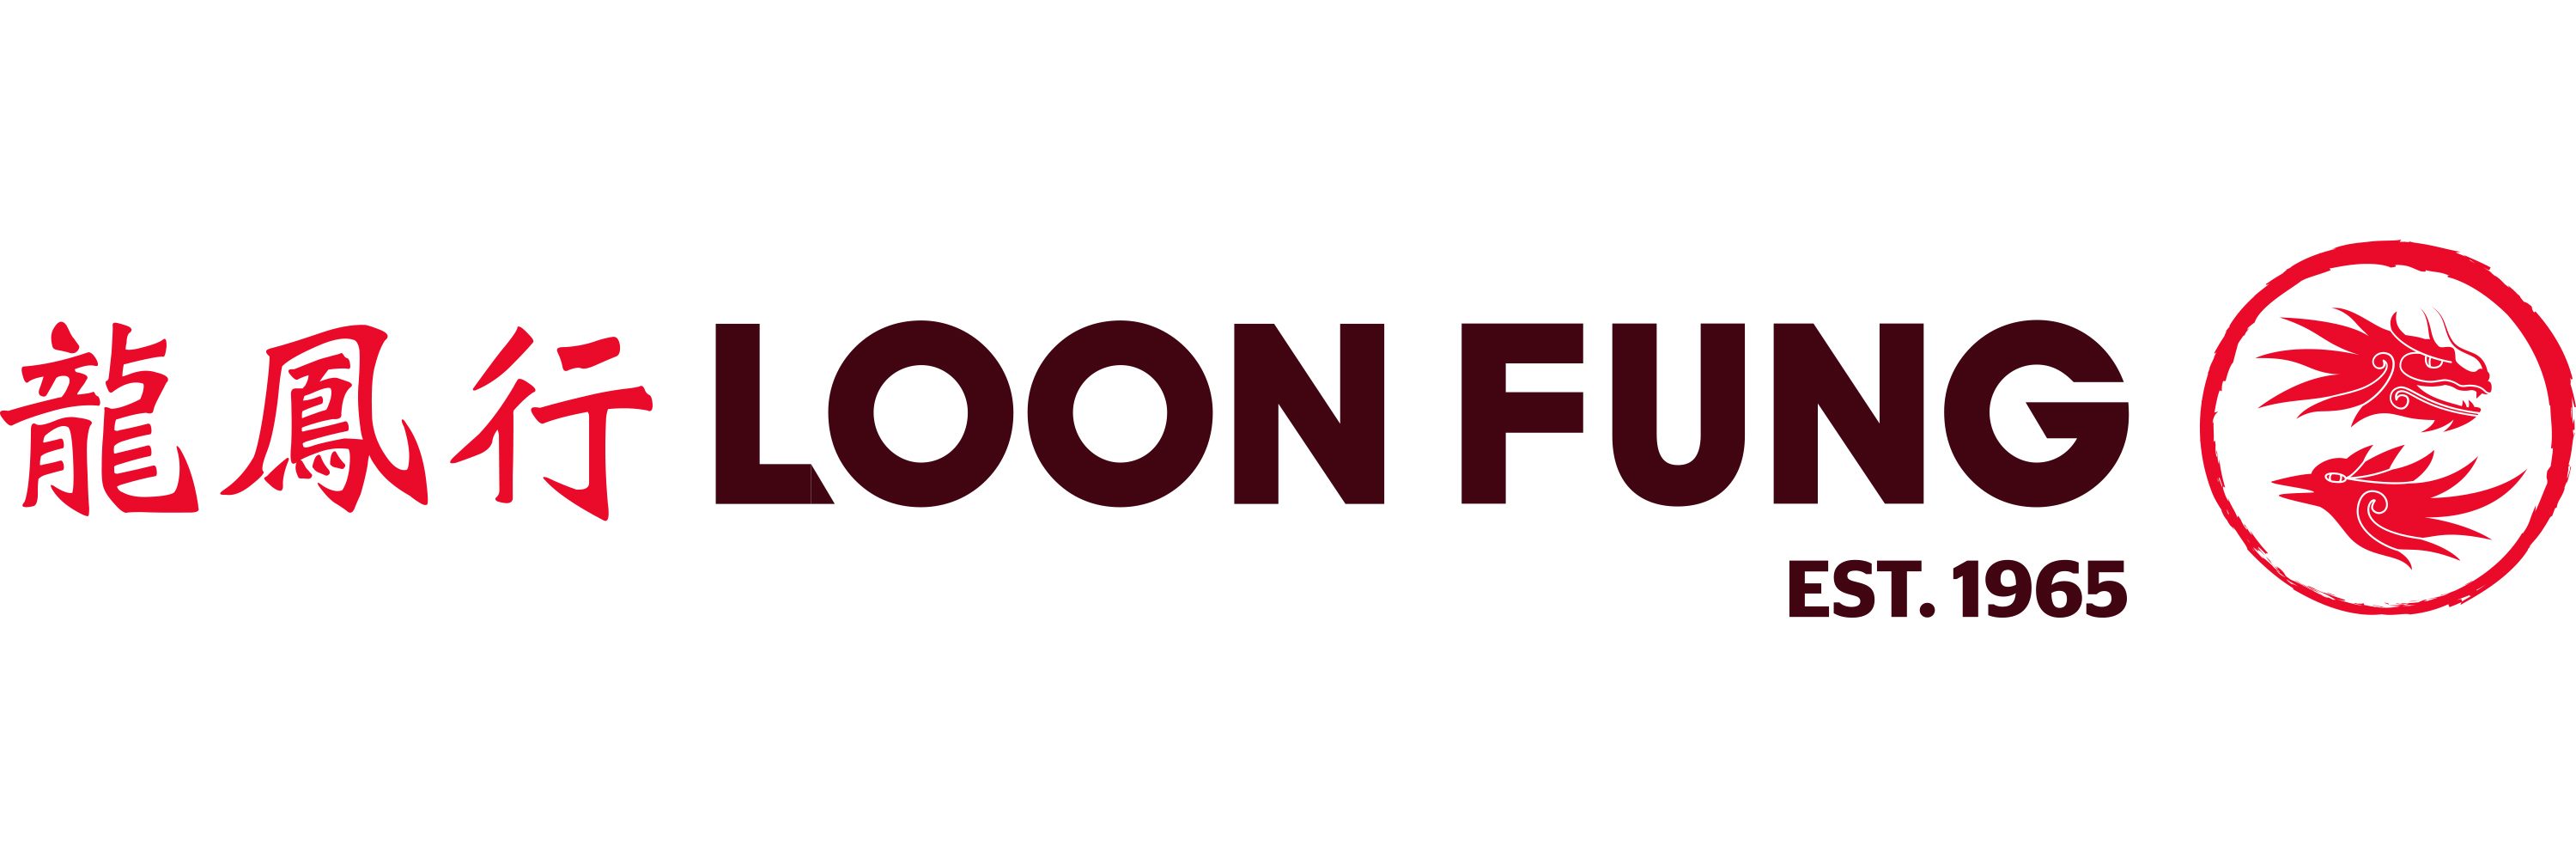 Logo designed for the new brand identity for Loon Fung brand by Household.